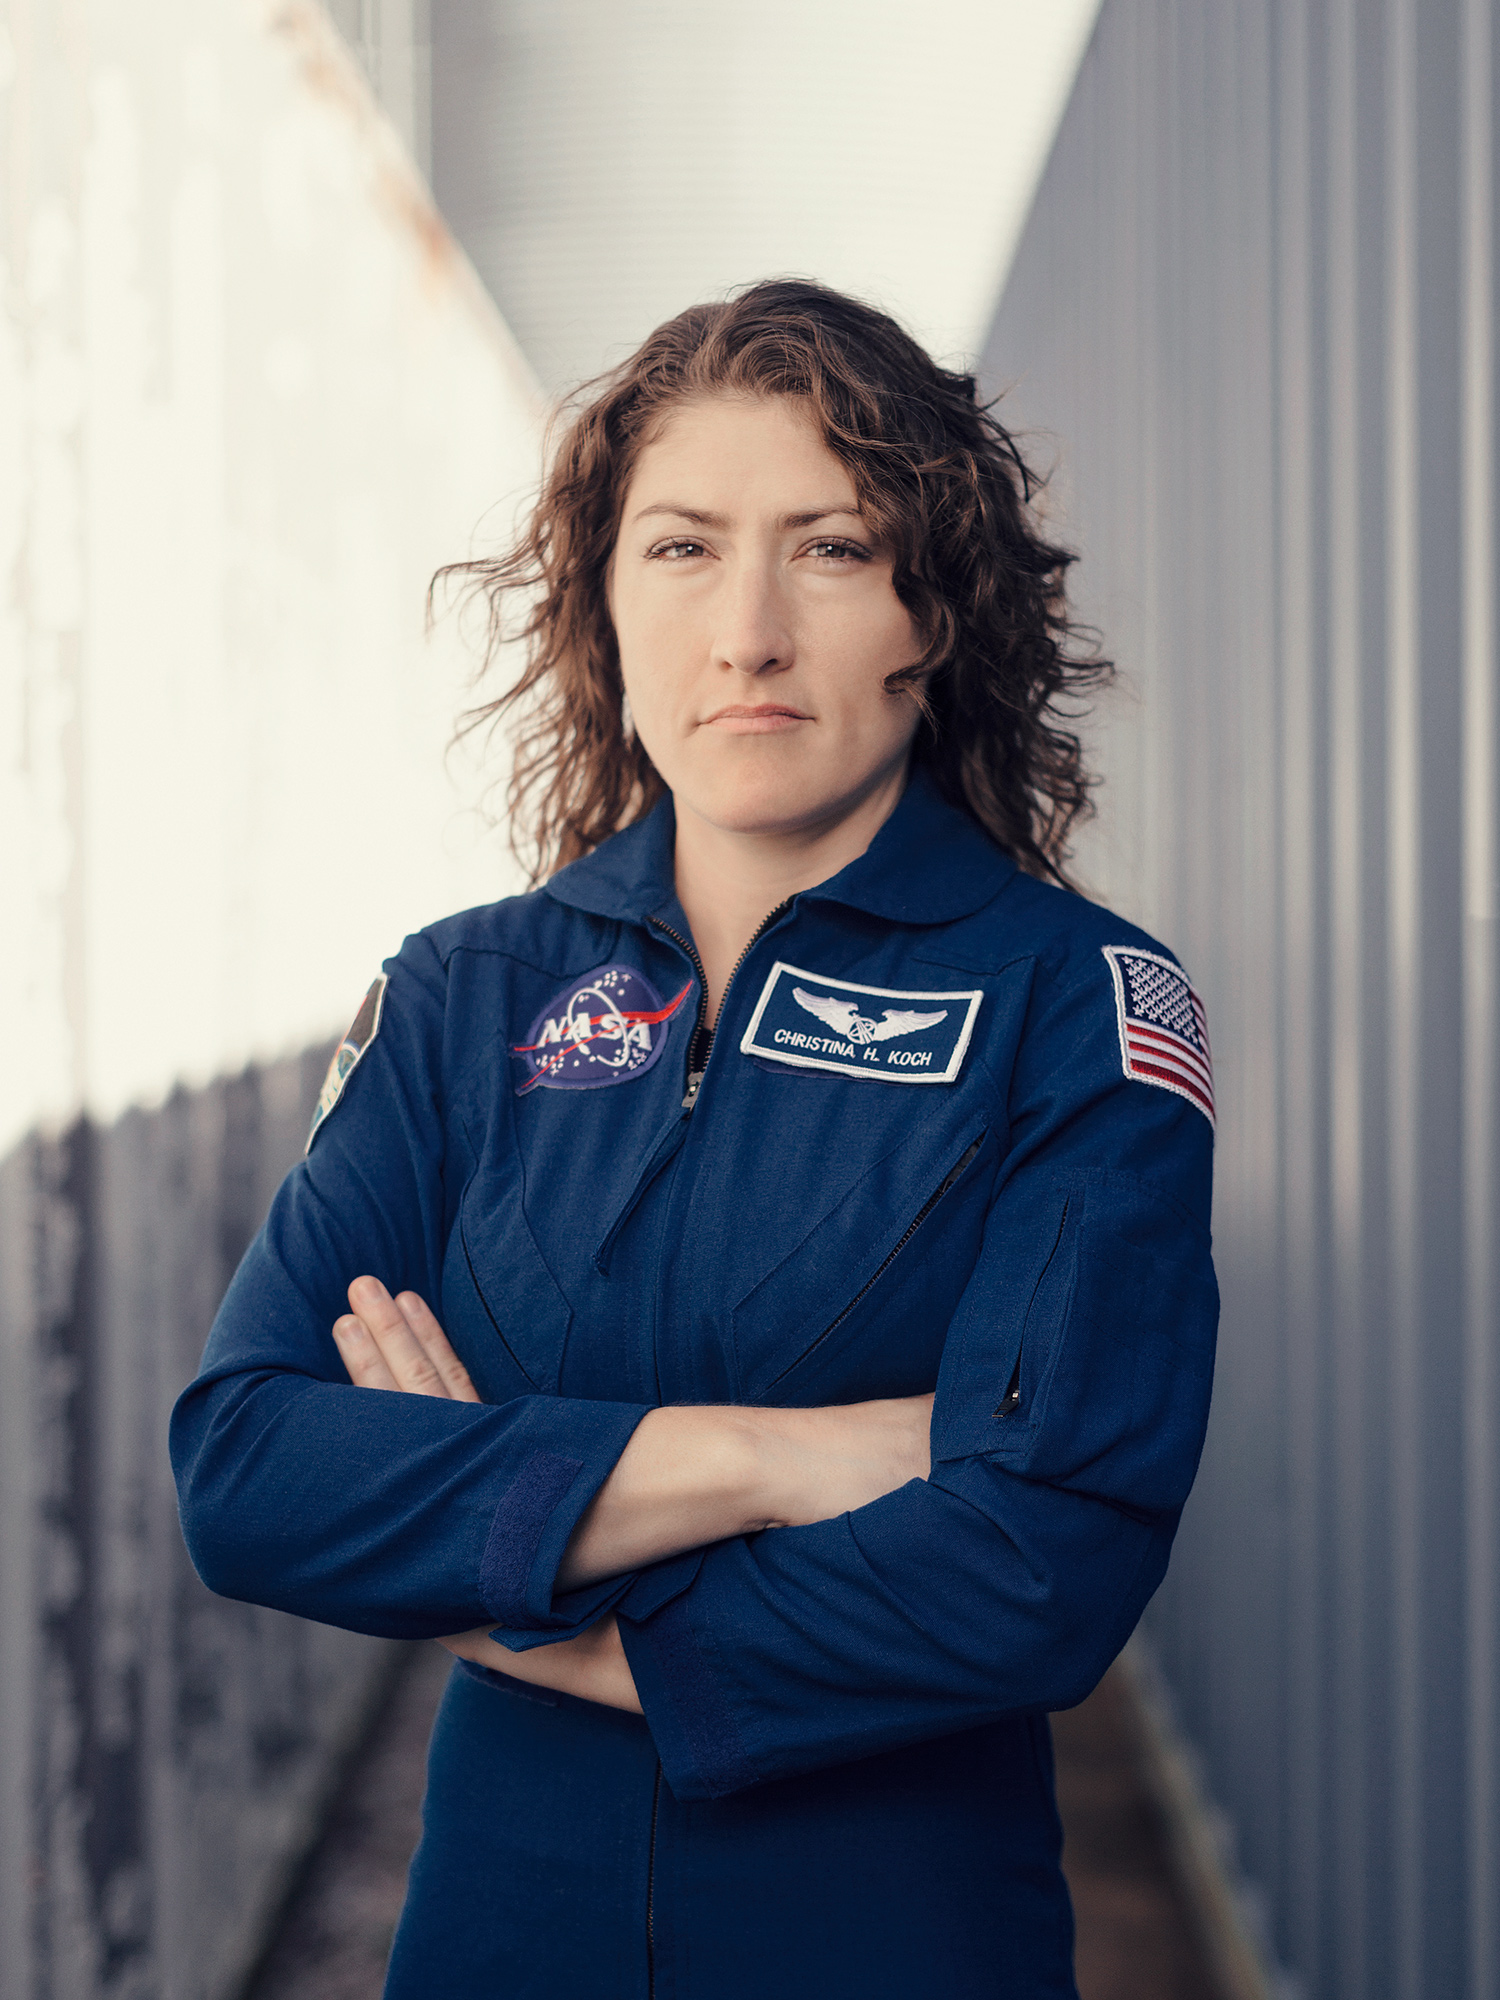 Christina Koch Nasa Astronaut Photographed At Johnson Space Center In Houston Texas By